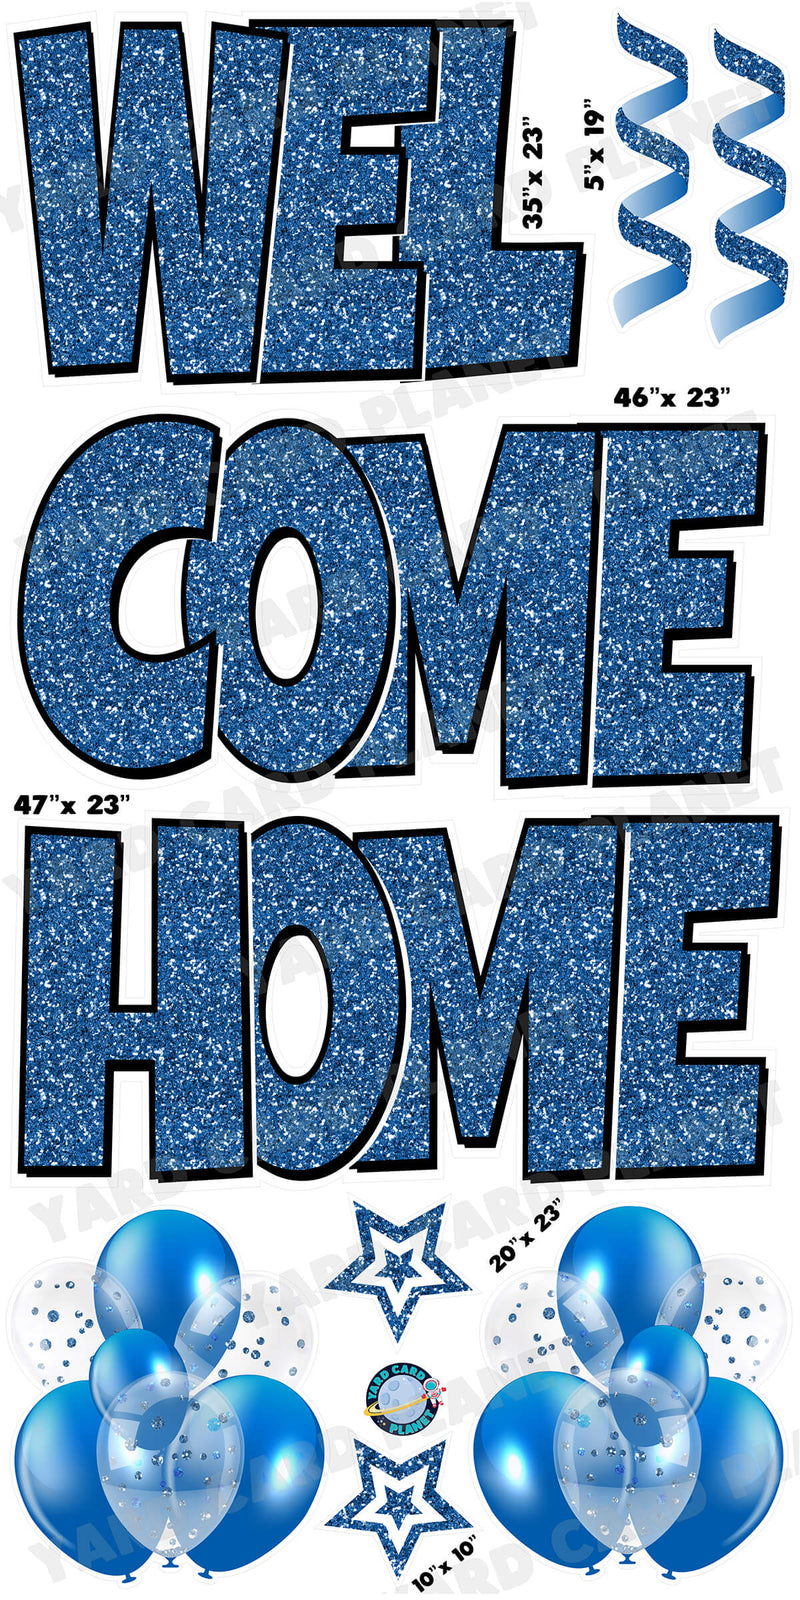 Large 23" Welcome Home Yard Card EZ Quick Sets in Luckiest Guy Font and Flair in Blue Glitter Pattern